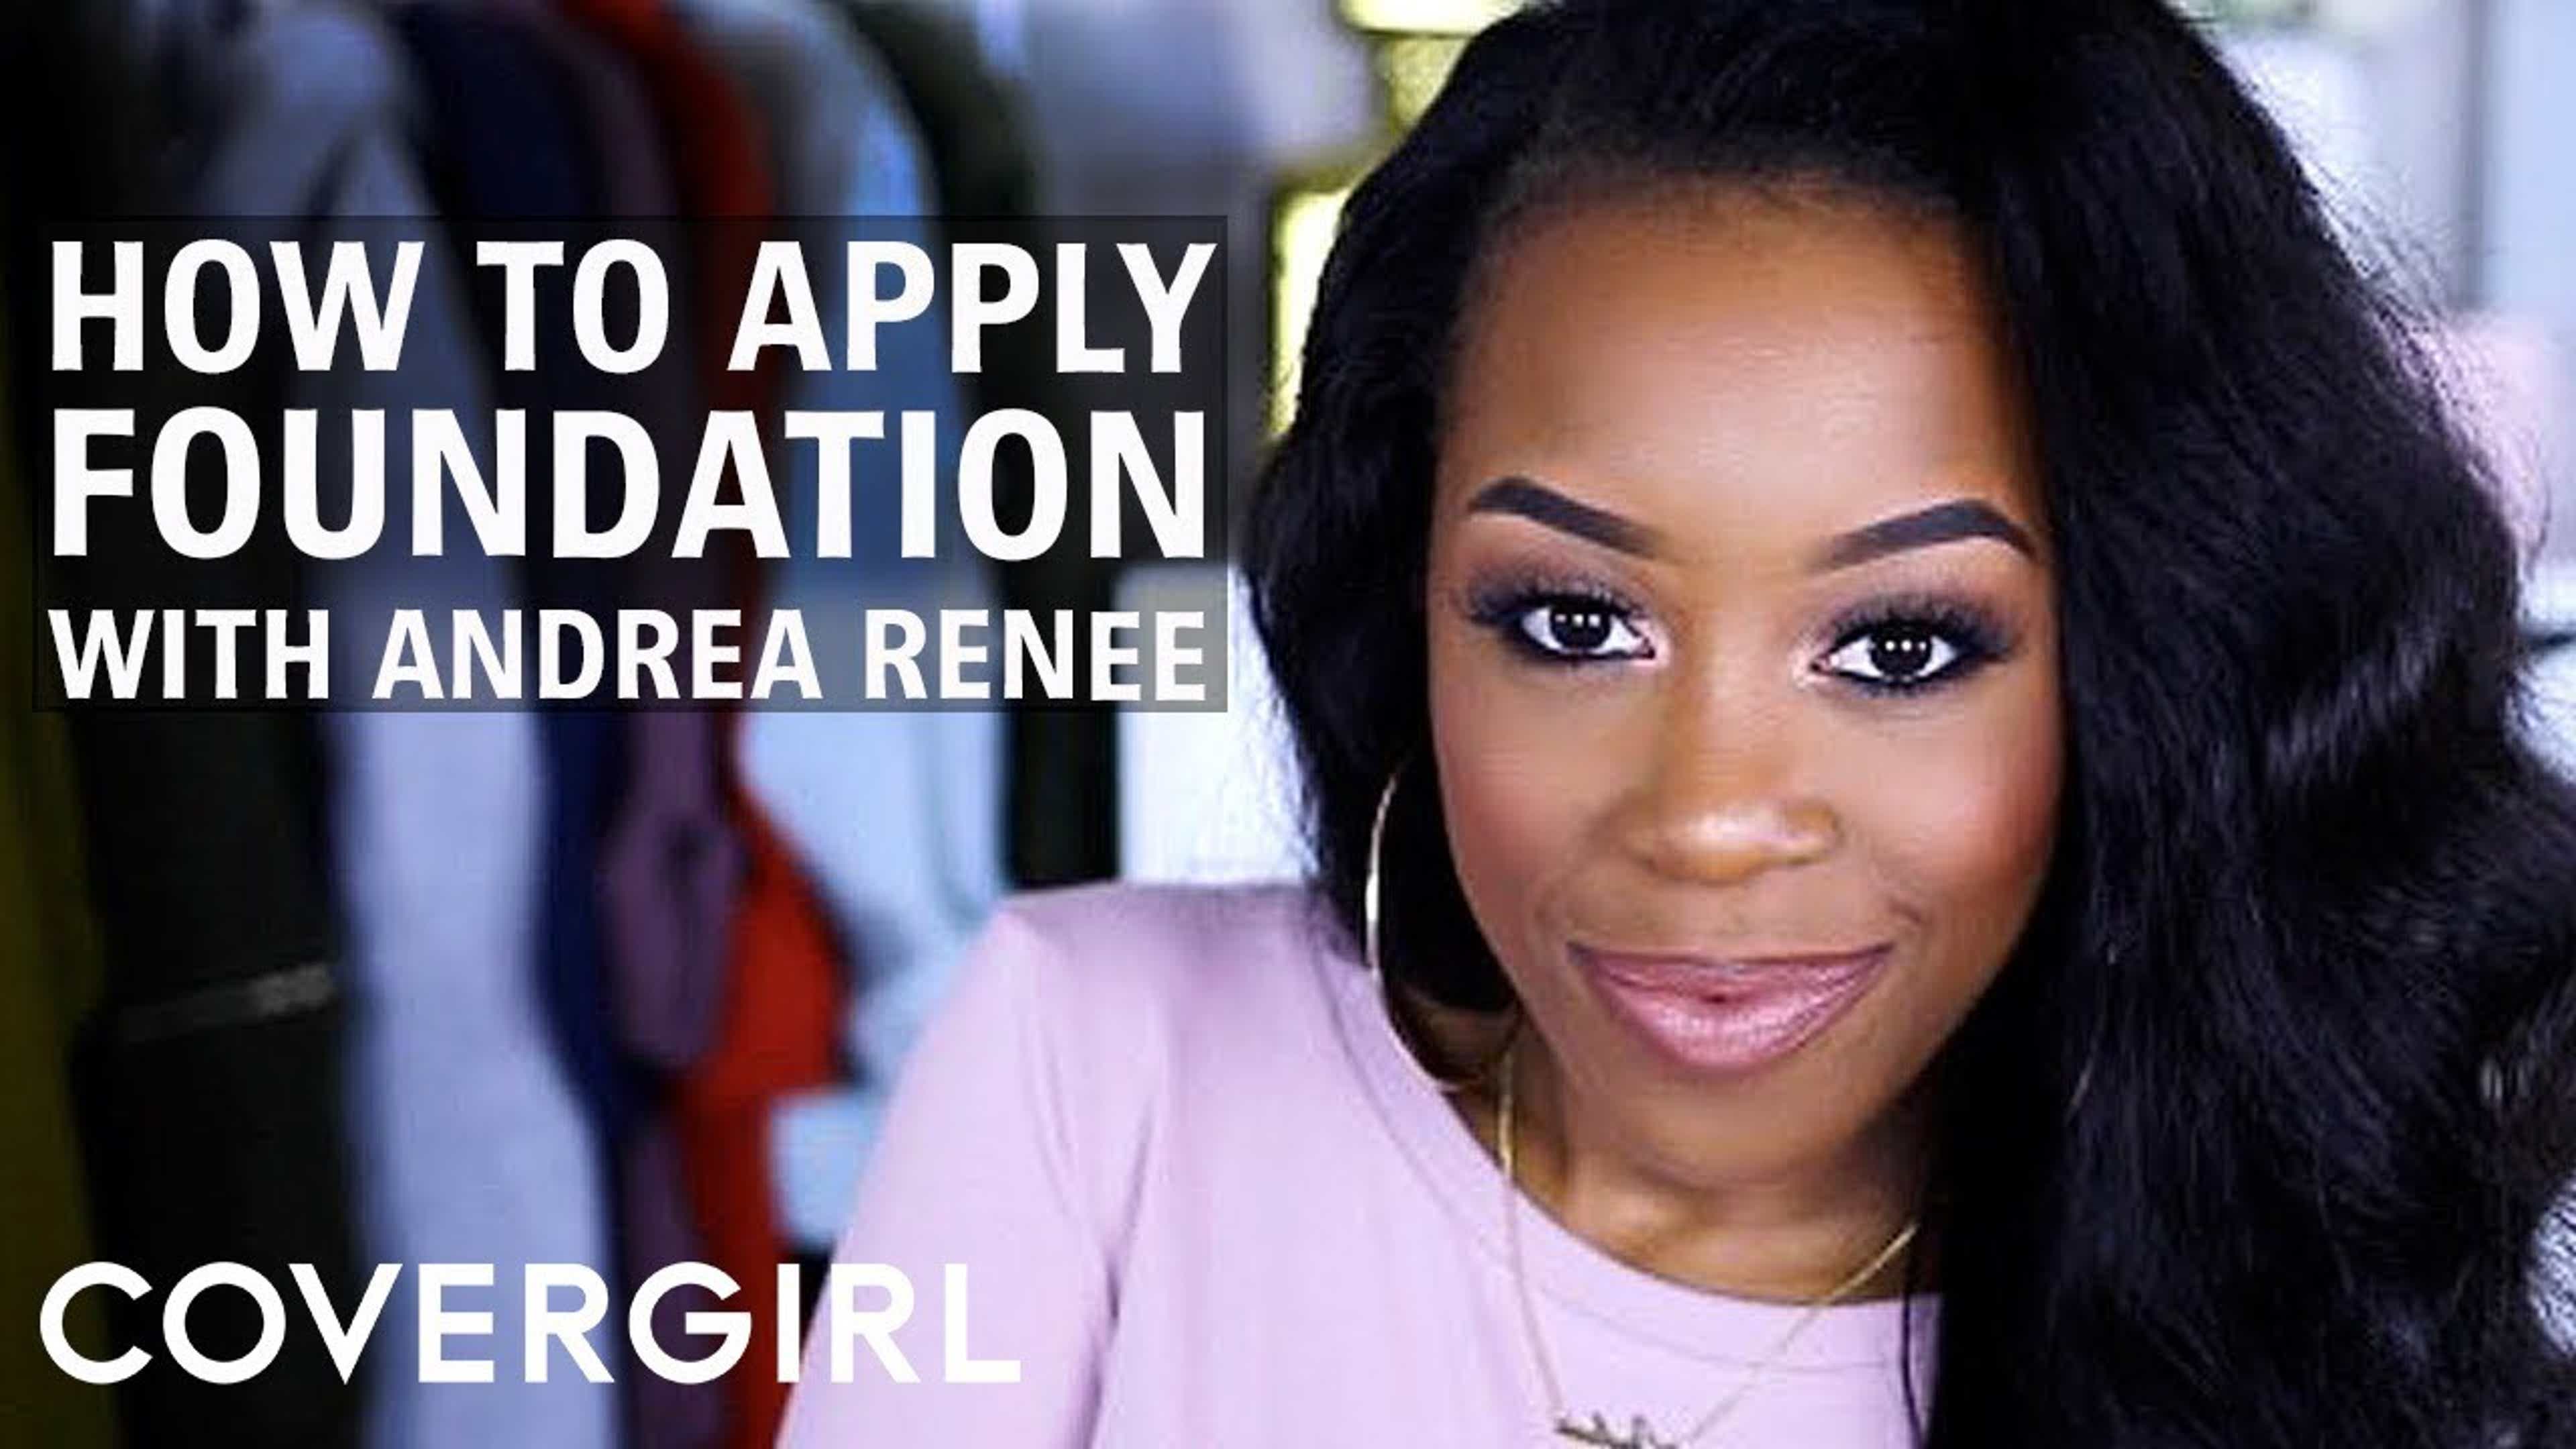 How to Apply Foundation with Andrea Renee